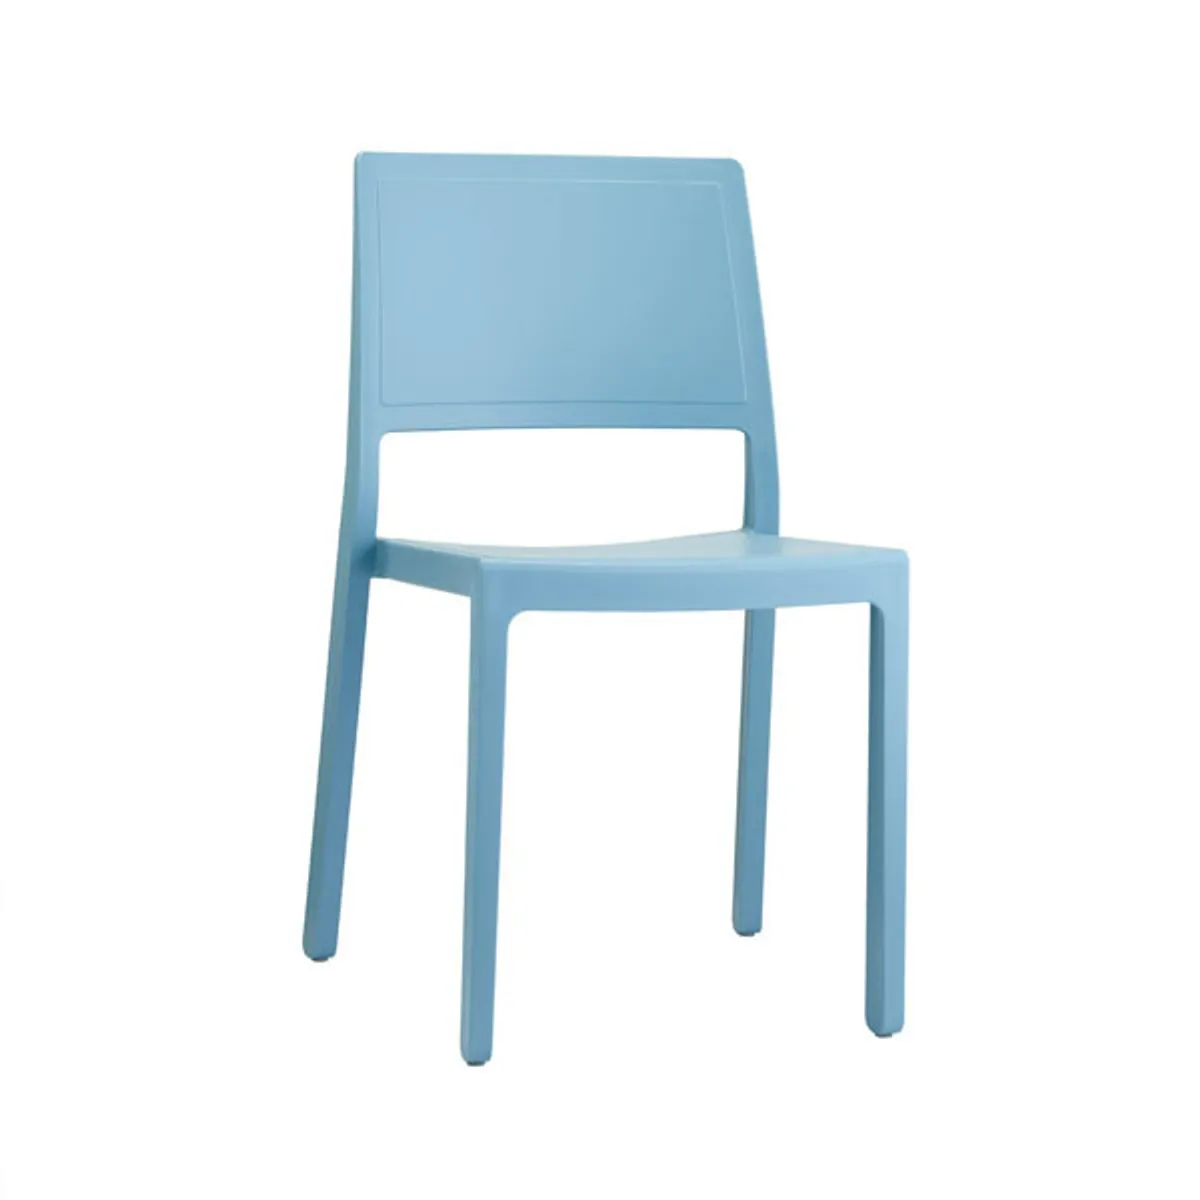 Remi side chair 5 Inside Out Contracts